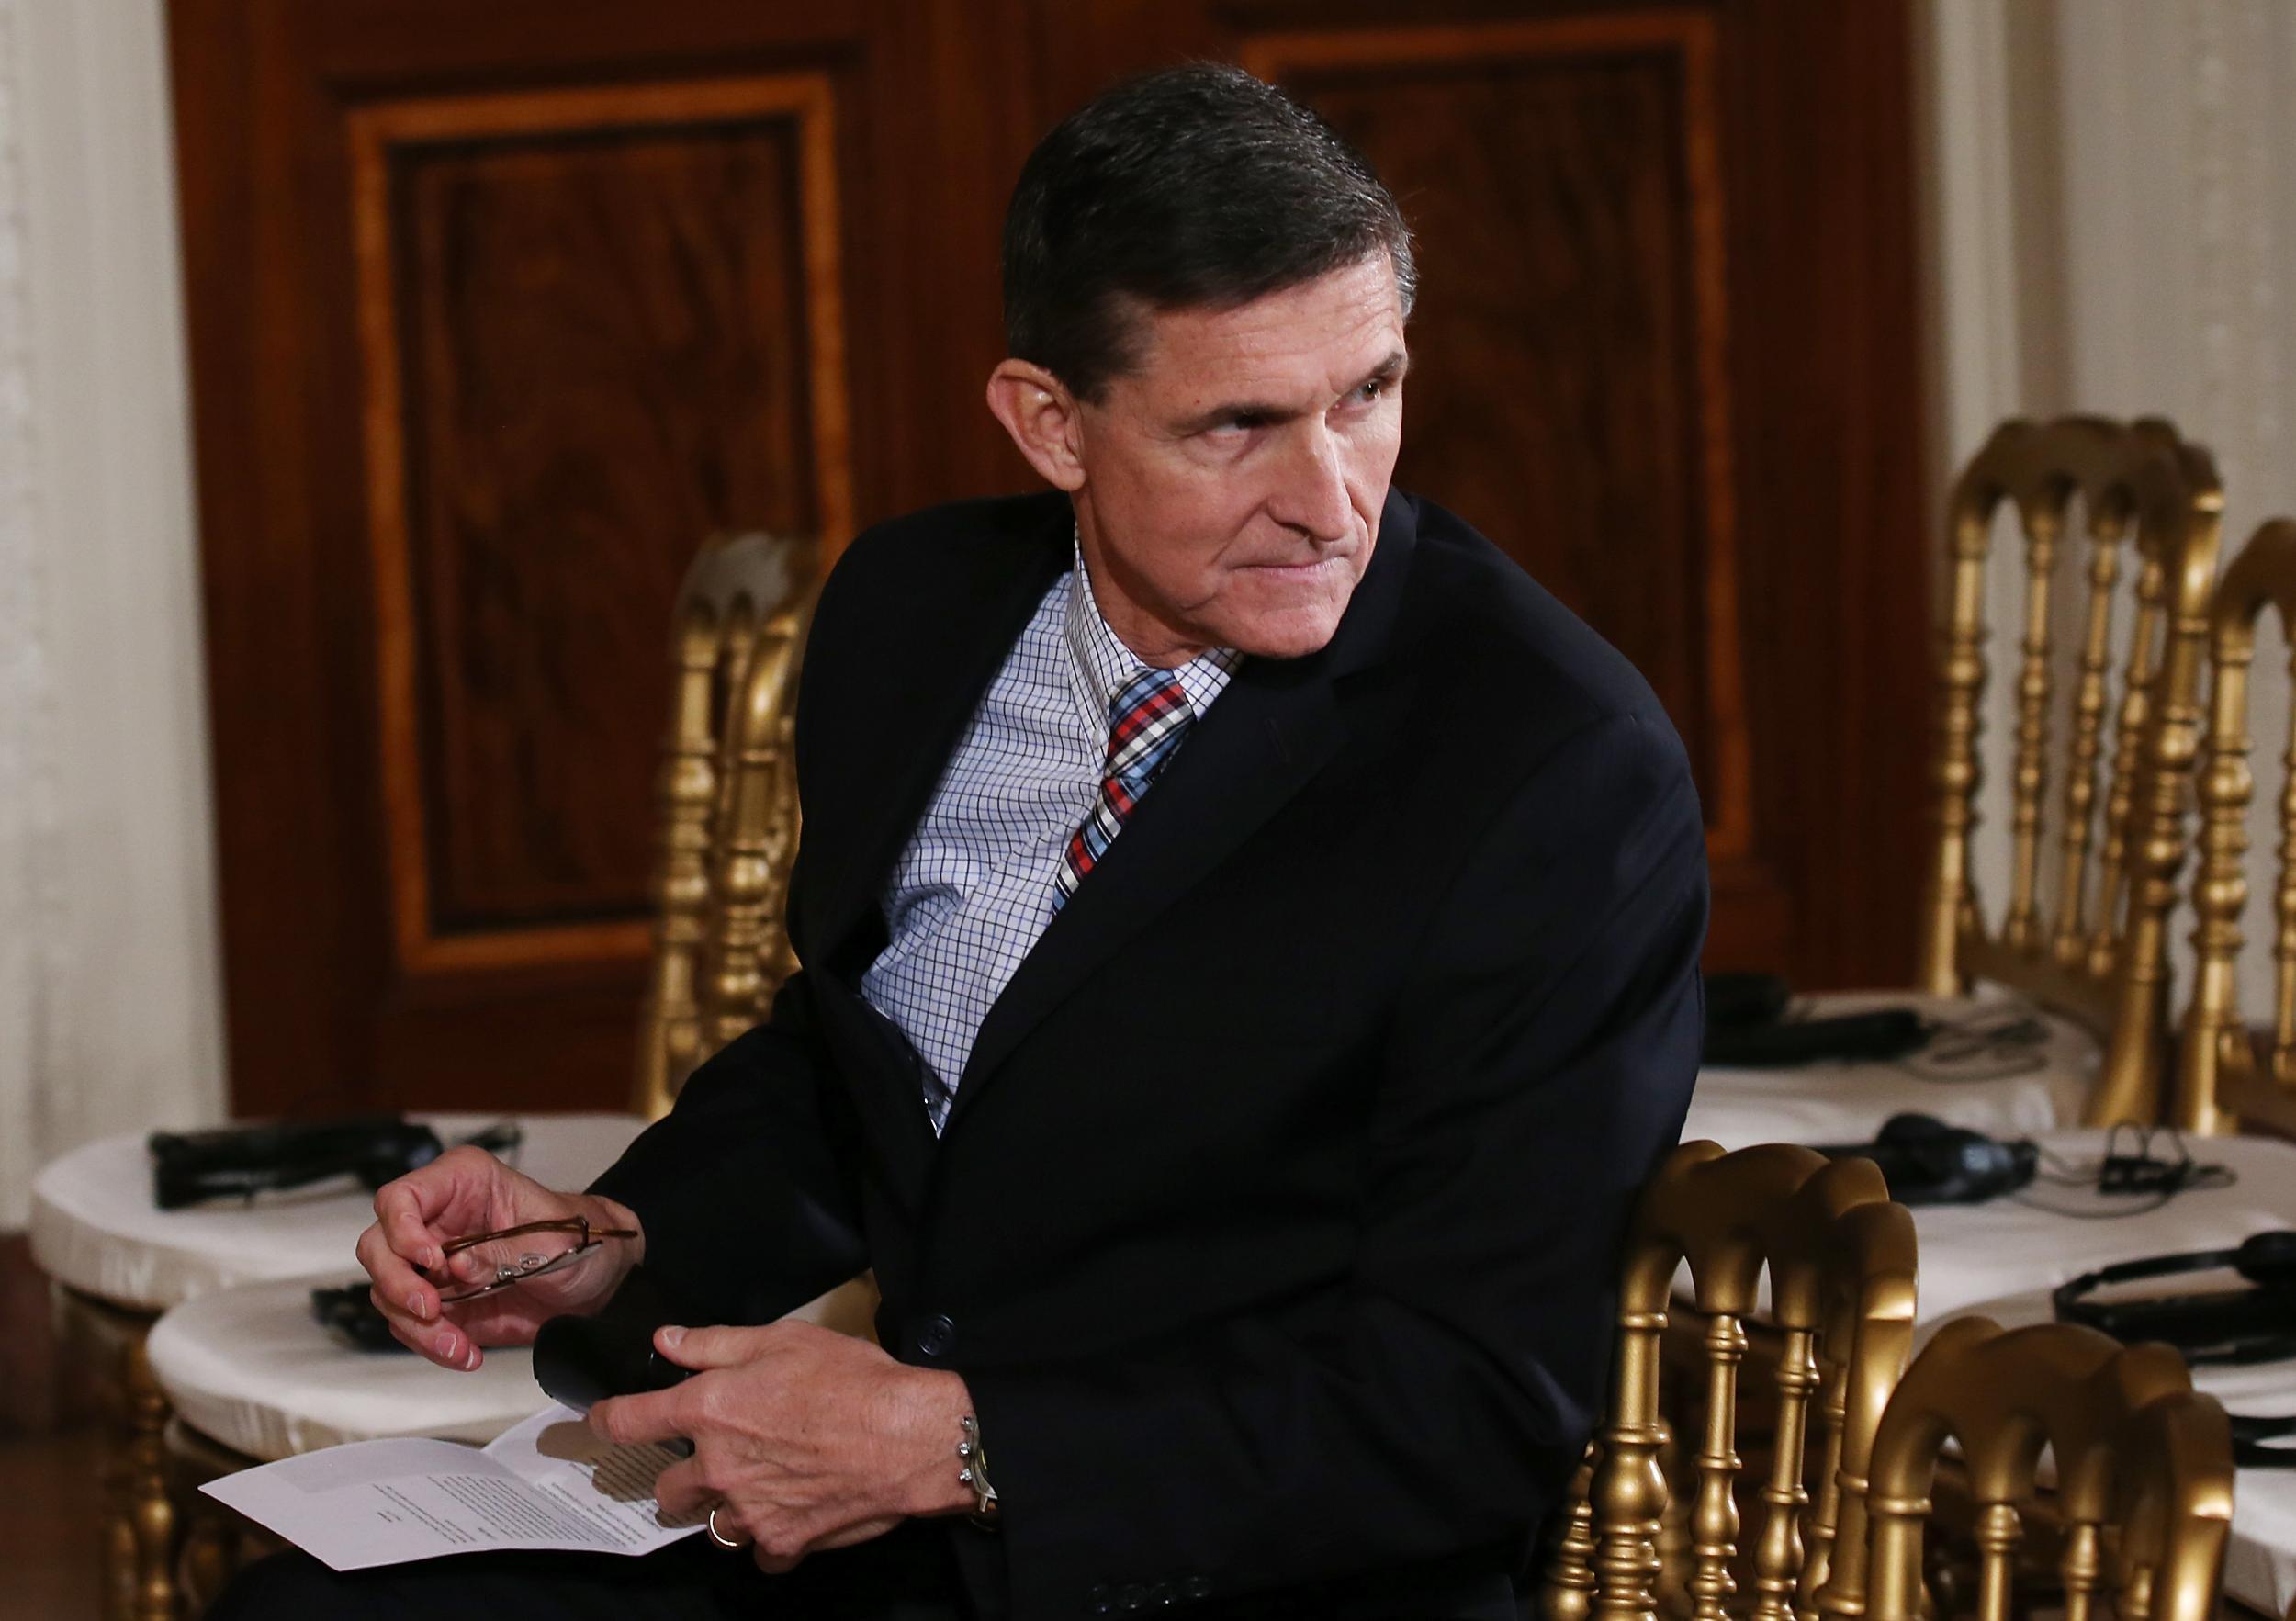 Russians felt that they could influence Mr Flynn because they knew him well